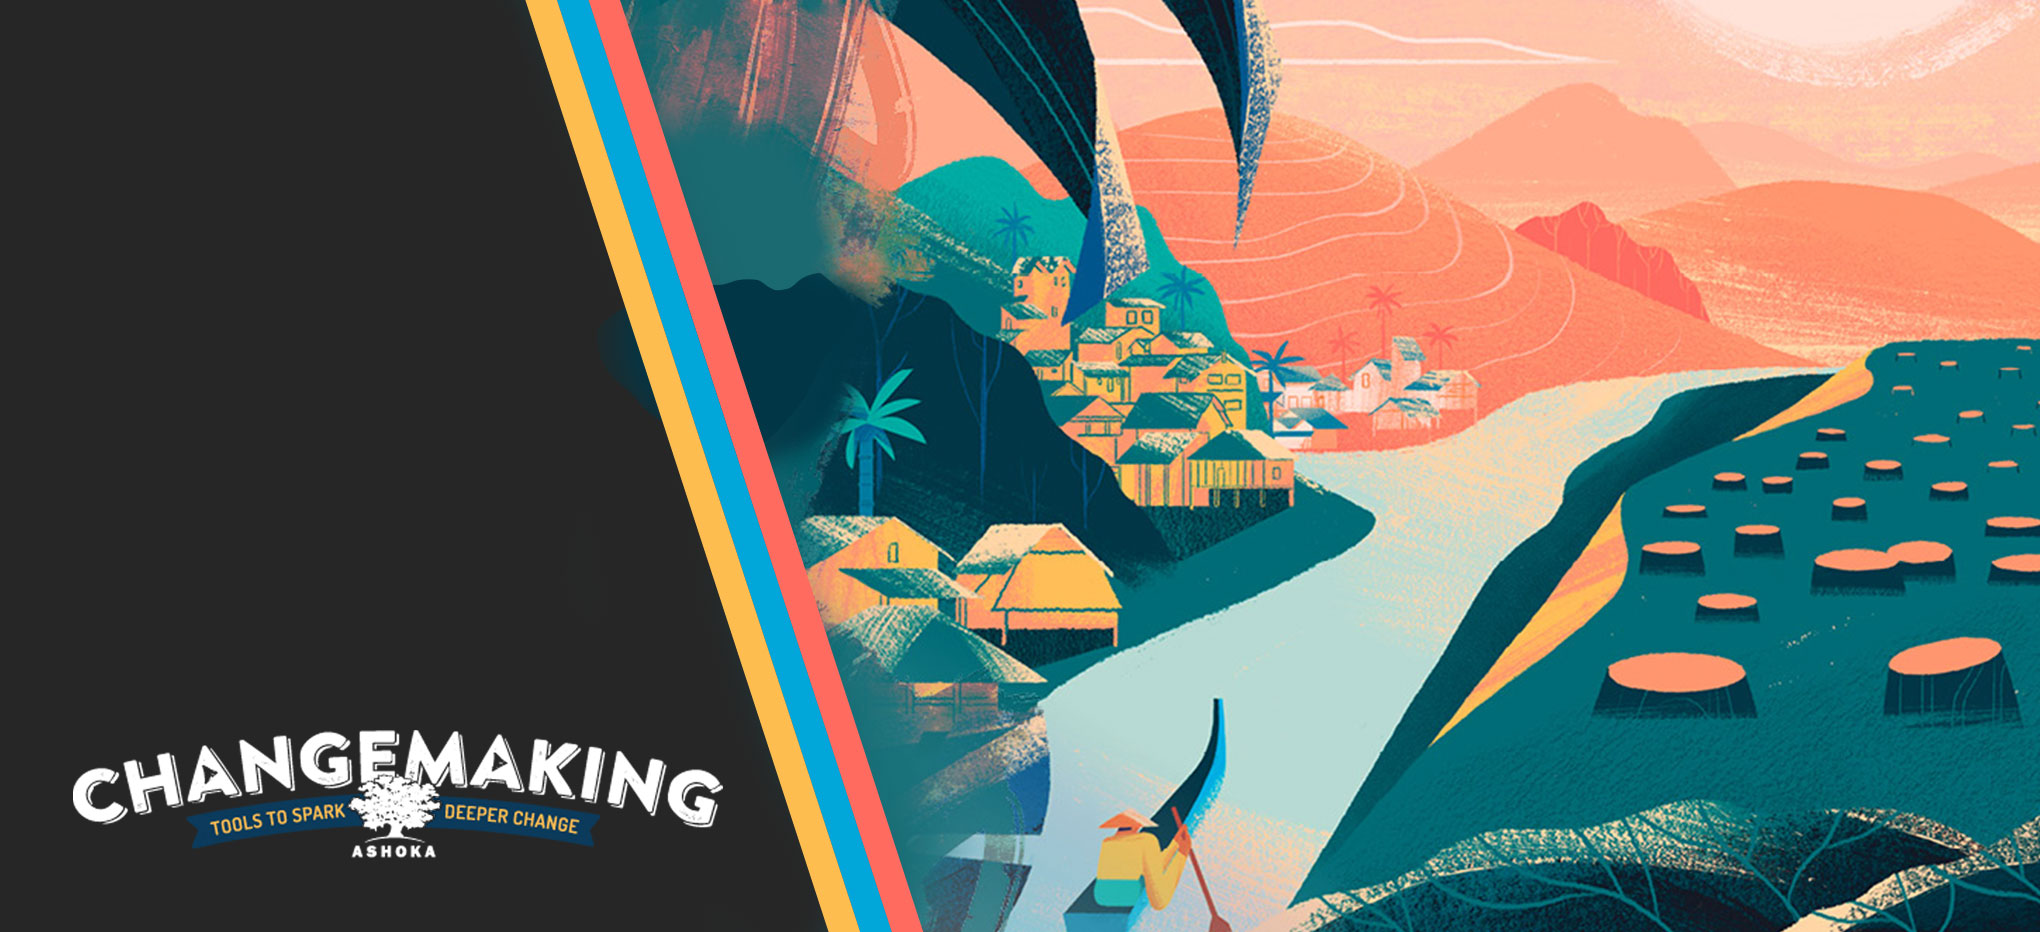 A web banner, cut diagonally by a three colored stripe with yellow, pink, and teal. The right side is a stylized illustration of a person rowing a small boat up a river towards a mountain and sunset. On the shore to the left is a jungle and city integrated into the forest. On the right is a clear-cut forest devoid of live. The left side of the banner is black with a white logo that reads Changemaking Tools to Spark Deeper Change.